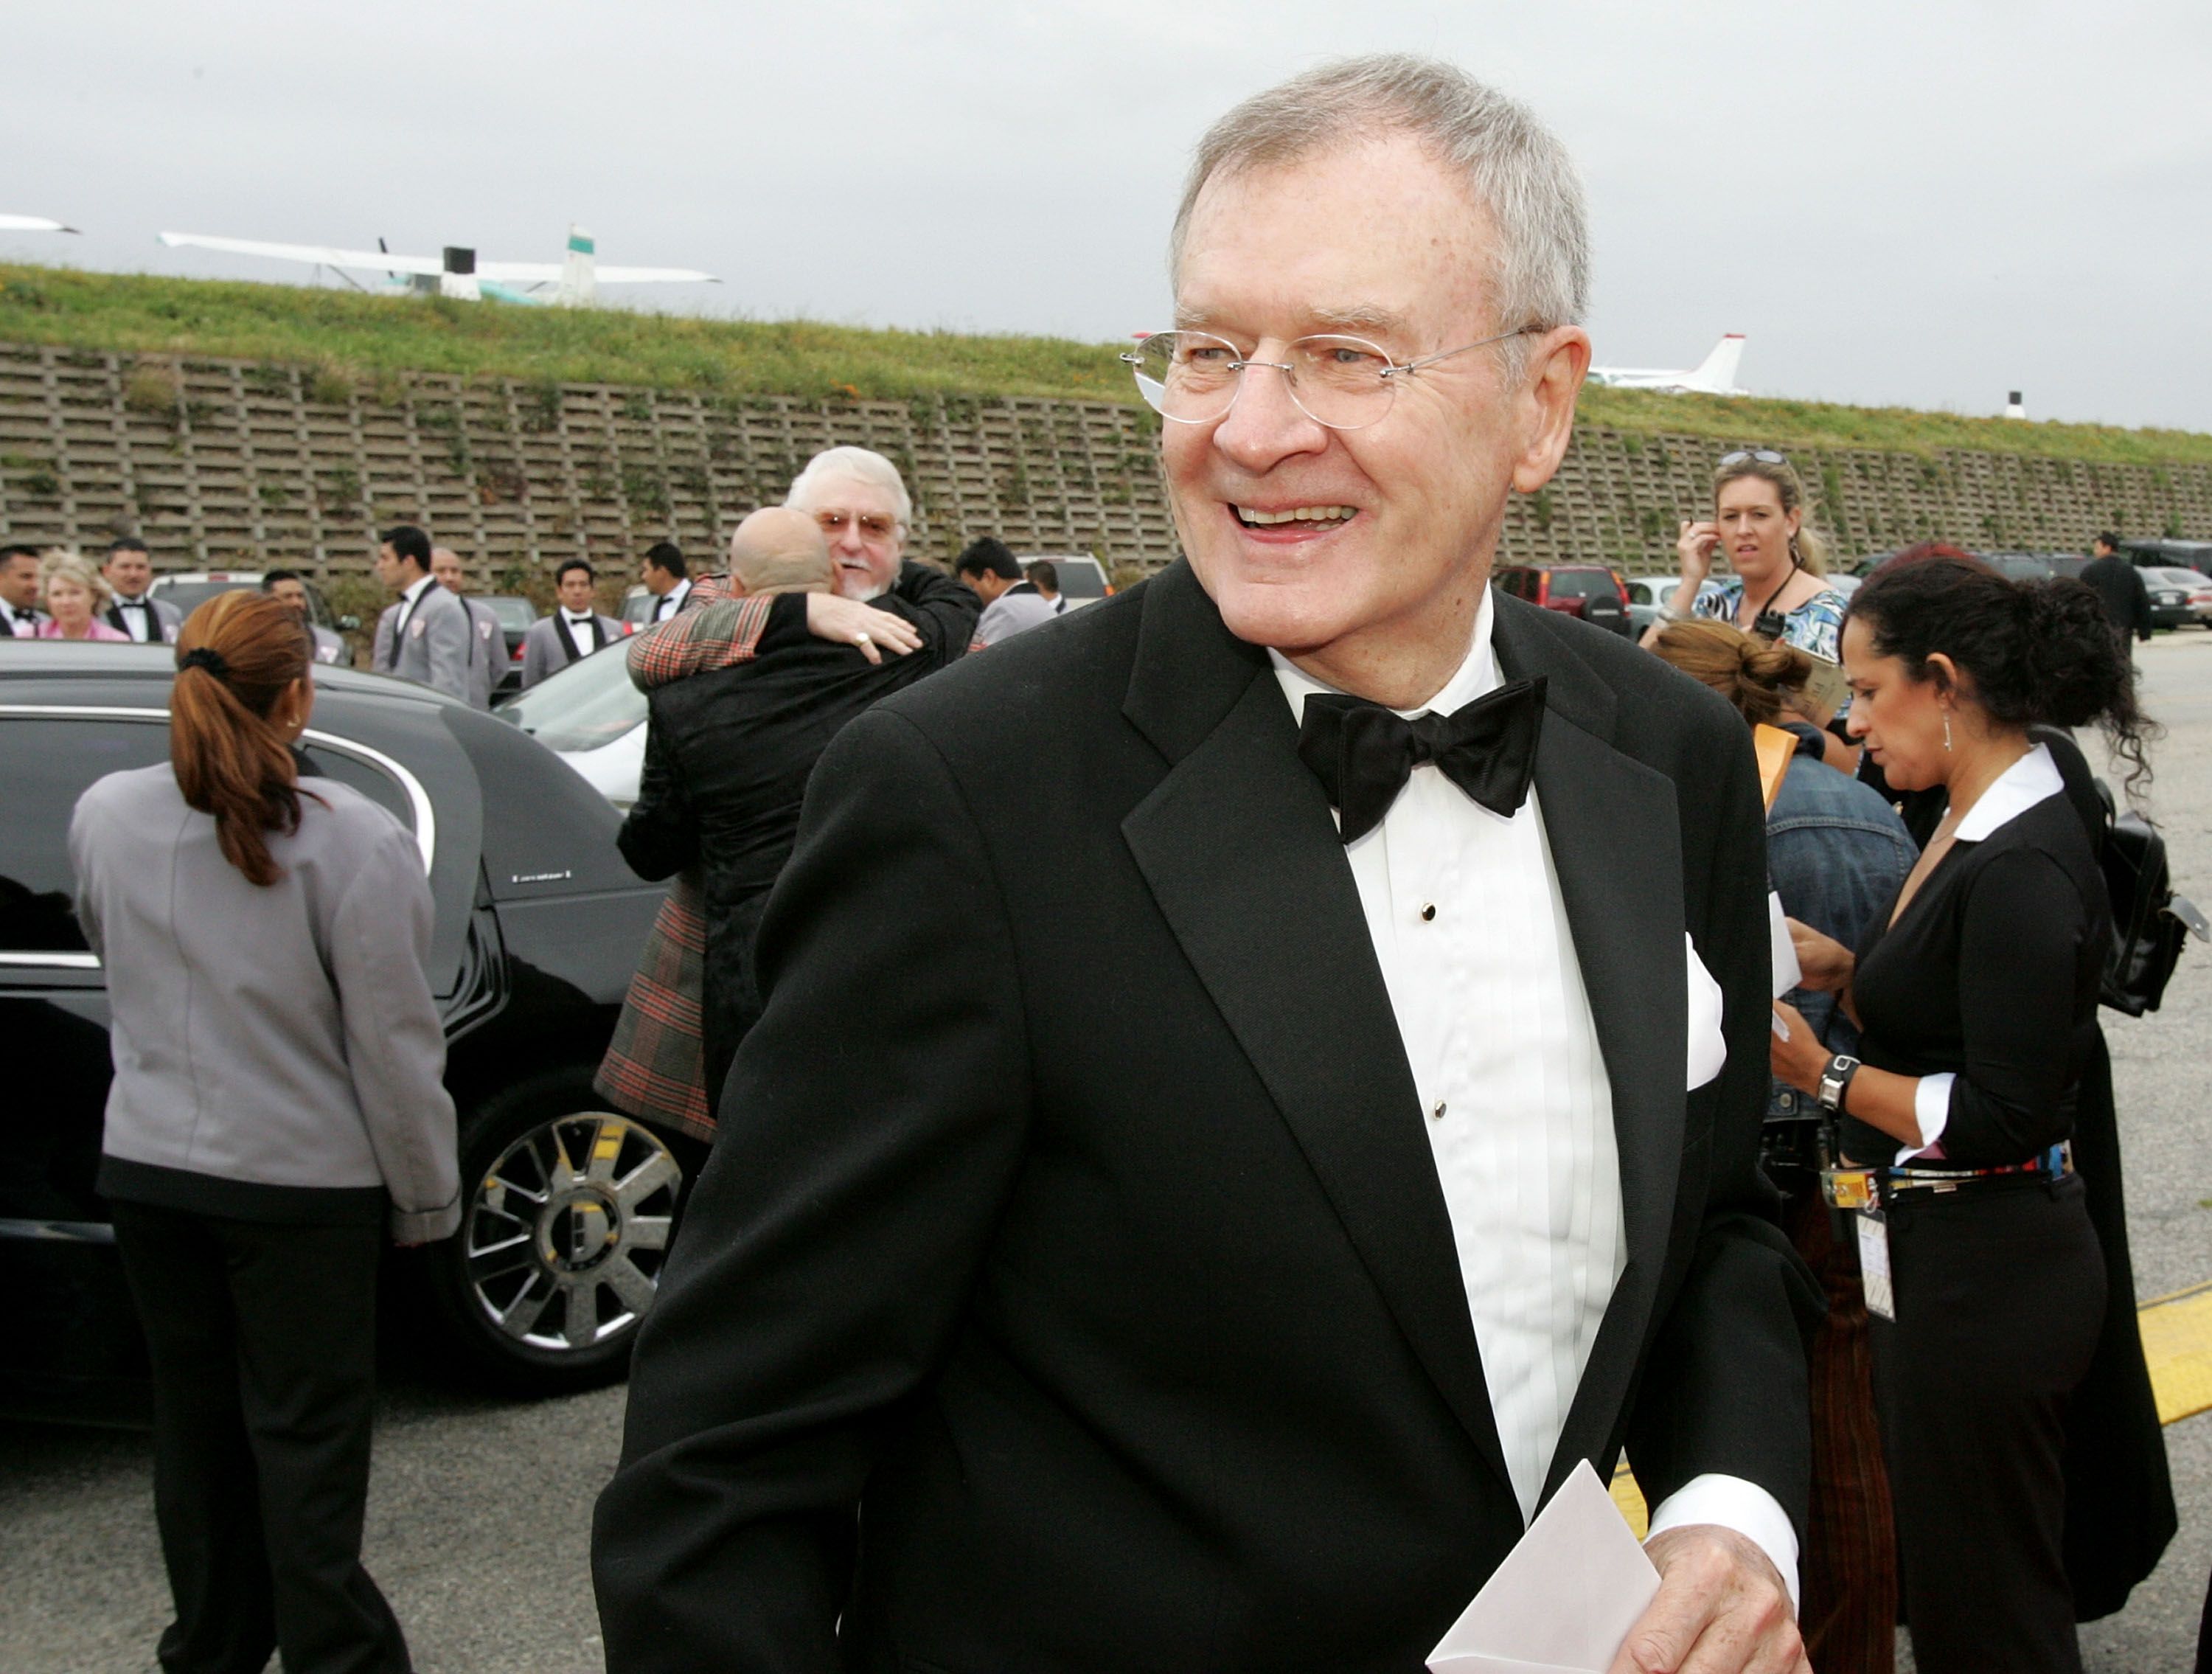 Bill Daily arrives at the 2005 TV Land Awards at Barker Hangar on March 13, 2005 in Santa Monica, California | Photo: Getty Images